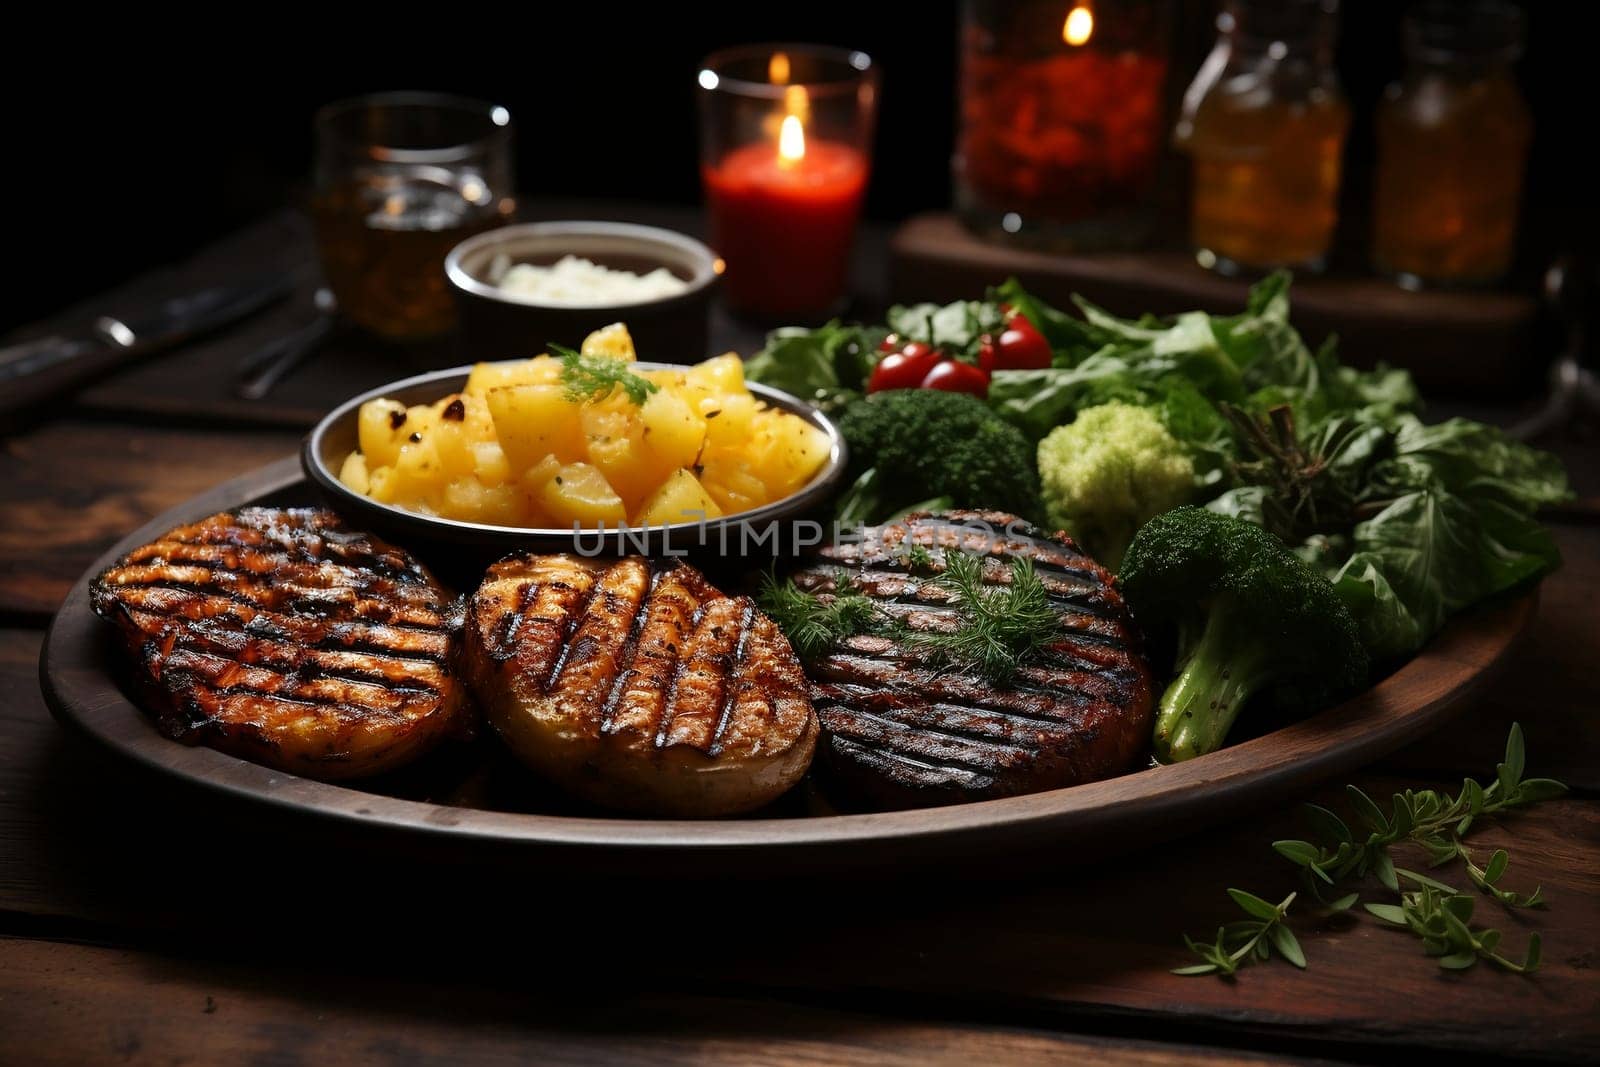 Meat cutlets and grilled vegetables on a dish on the kitchen table, greens and cutlery nearby. AI by maclura